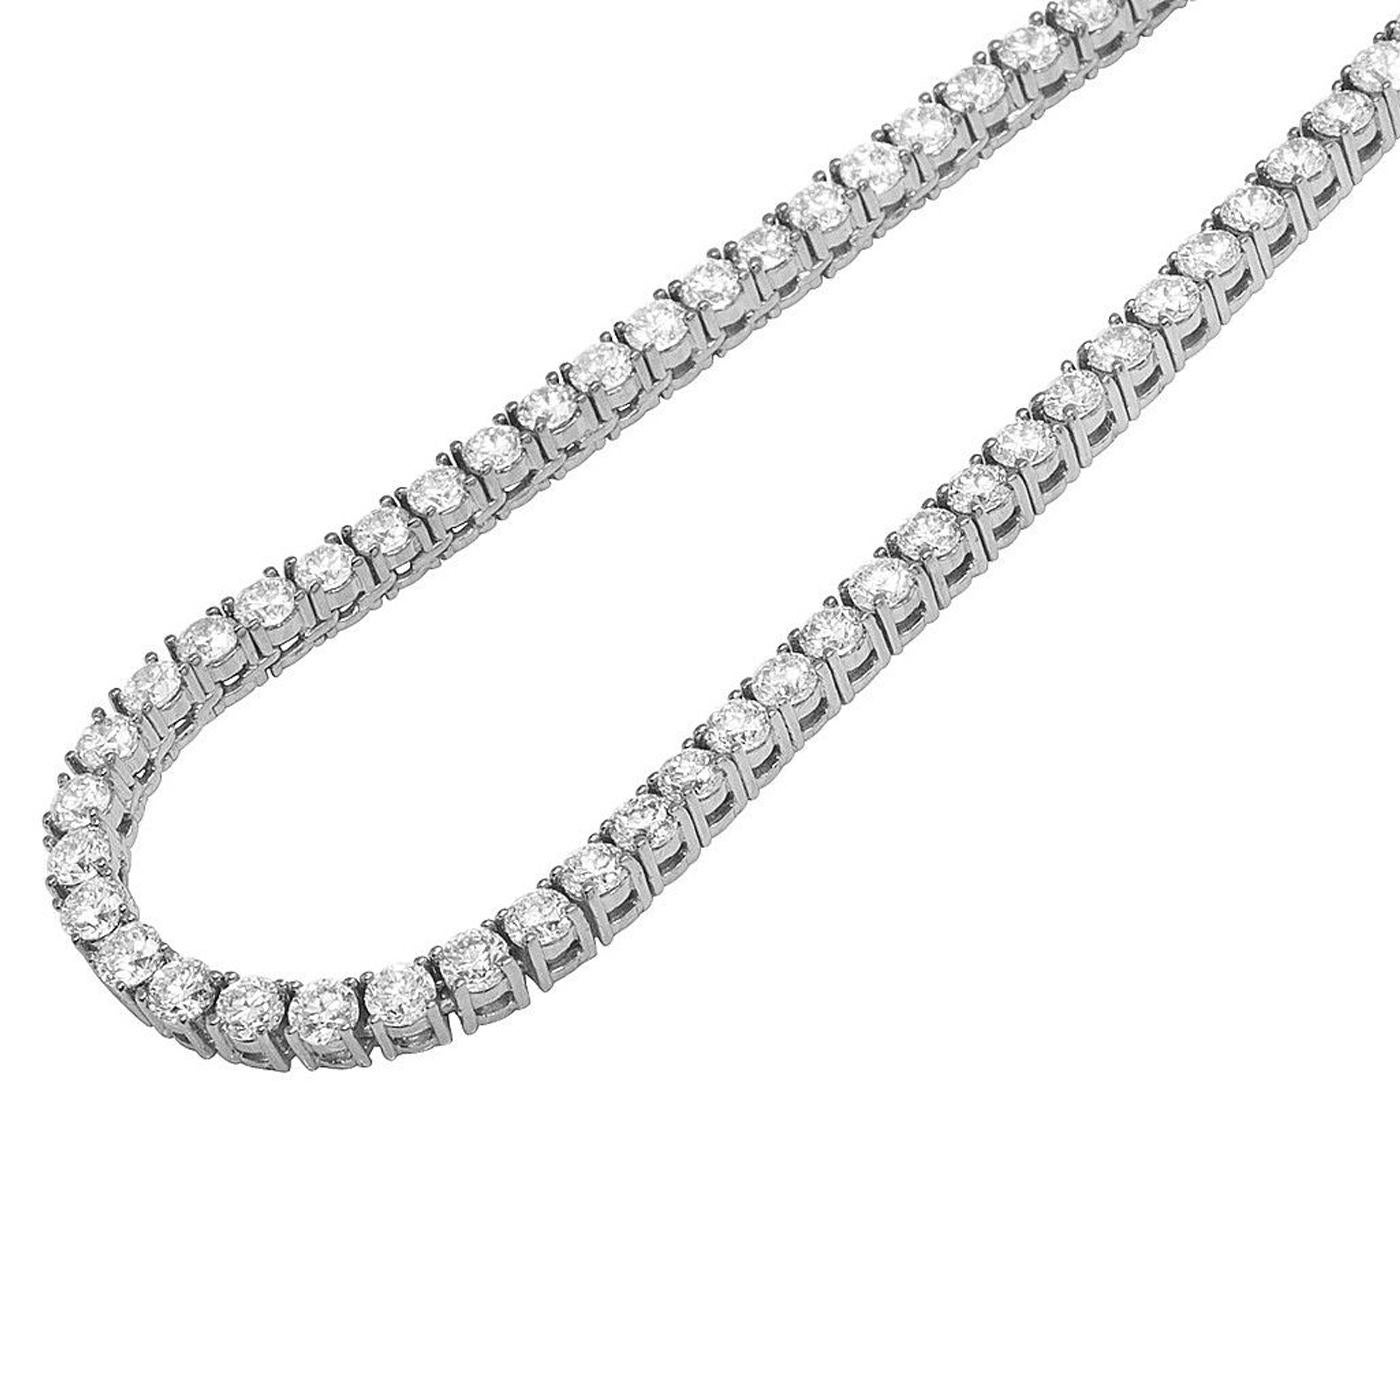 14K White Gold Diamond Tennis Necklace, Features 21.5Ct of Round Diamonds. Beautiful Diamond Tennis Necklace. A staple in your jewelry collection. Made in 14k white gold. This tennis necklace showcases a delicate 4 prongs in line chain embellished